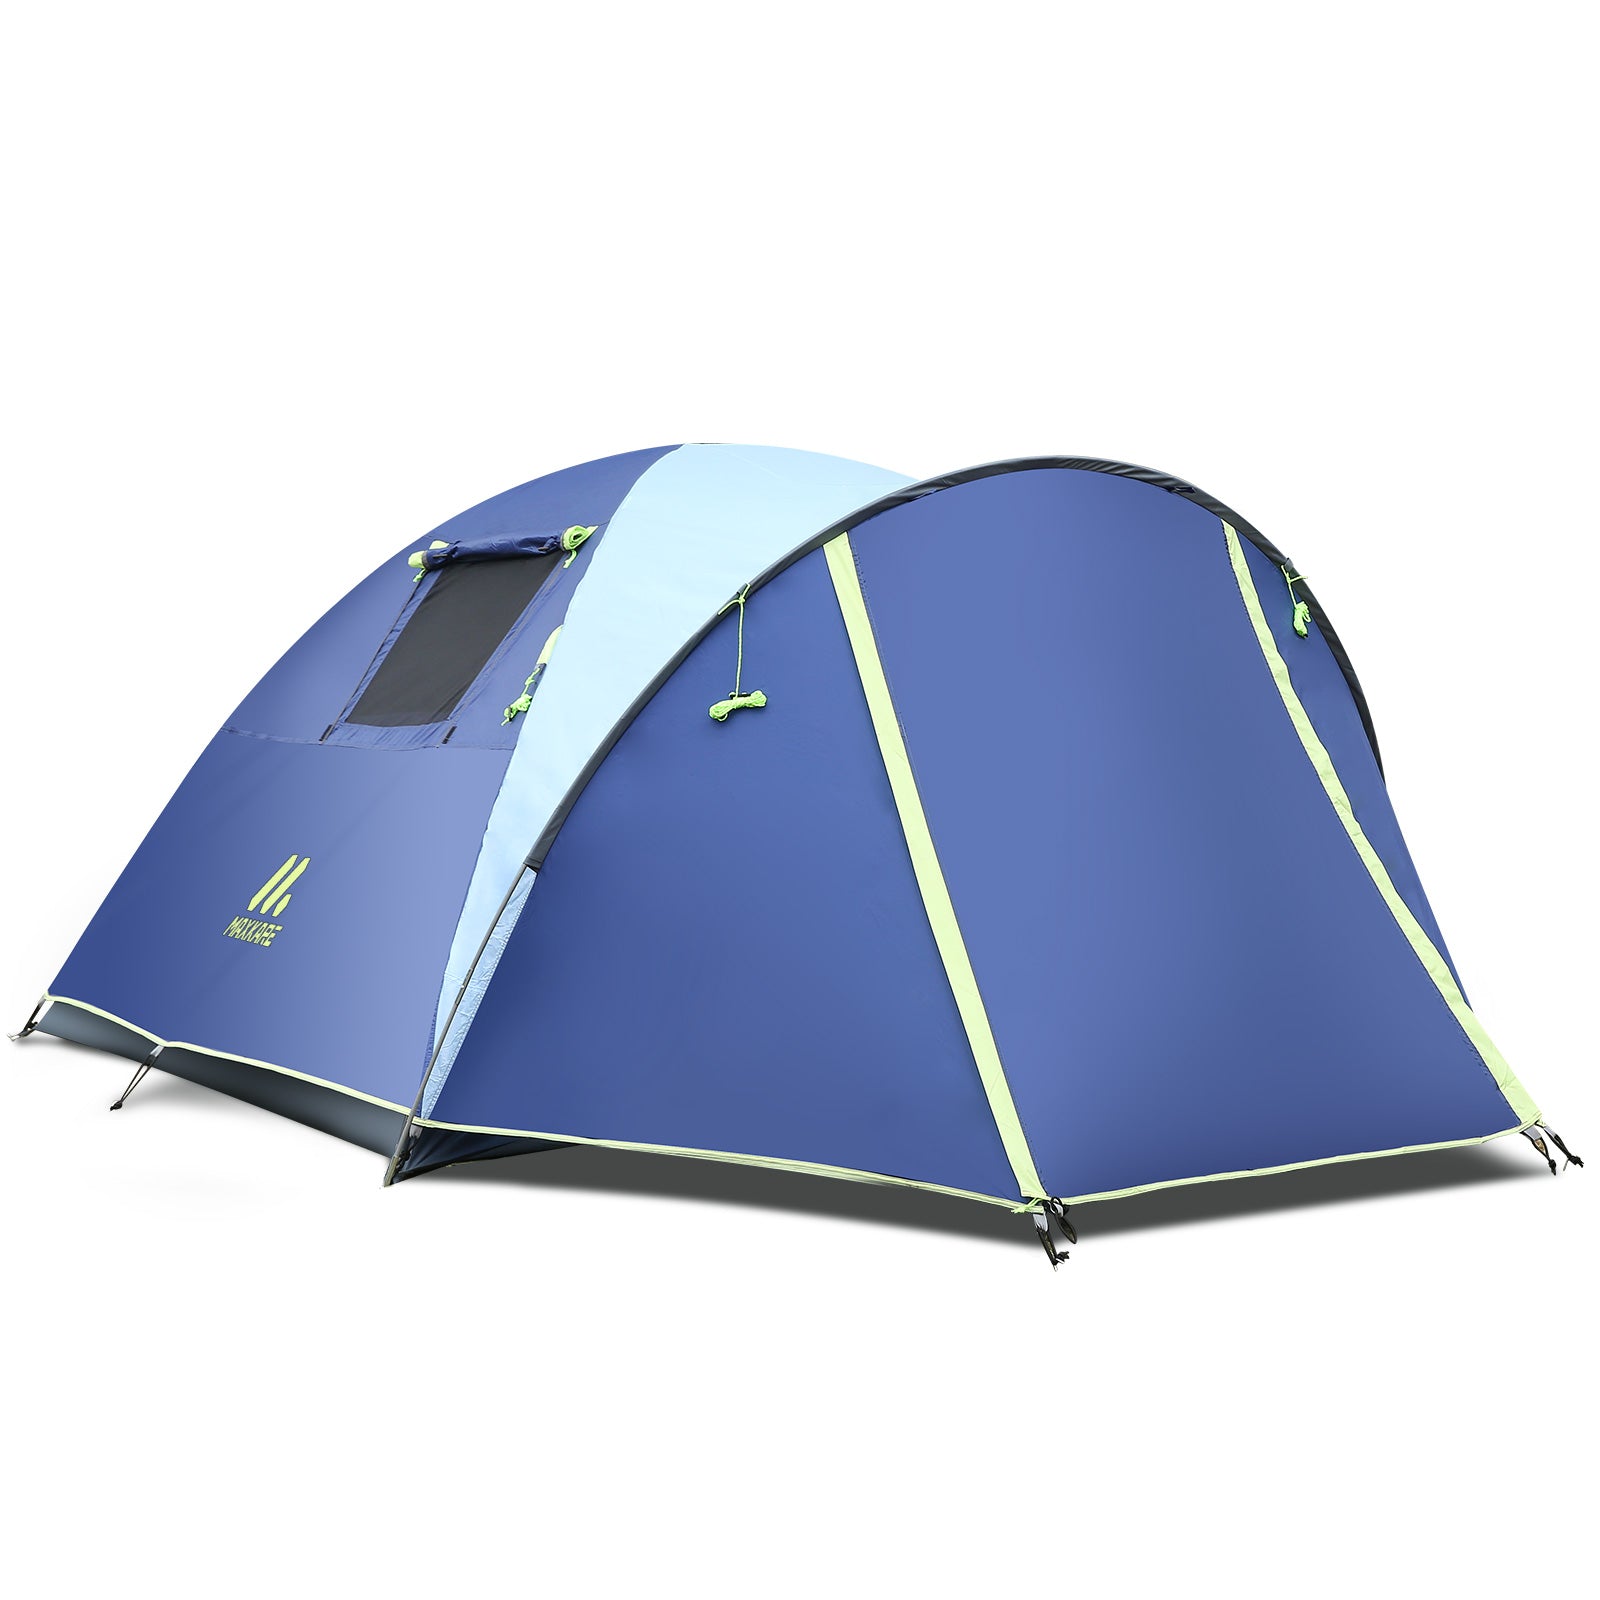 Maxkare 4 Person Instant Setup Tent with 2 Doors Automatic Easy